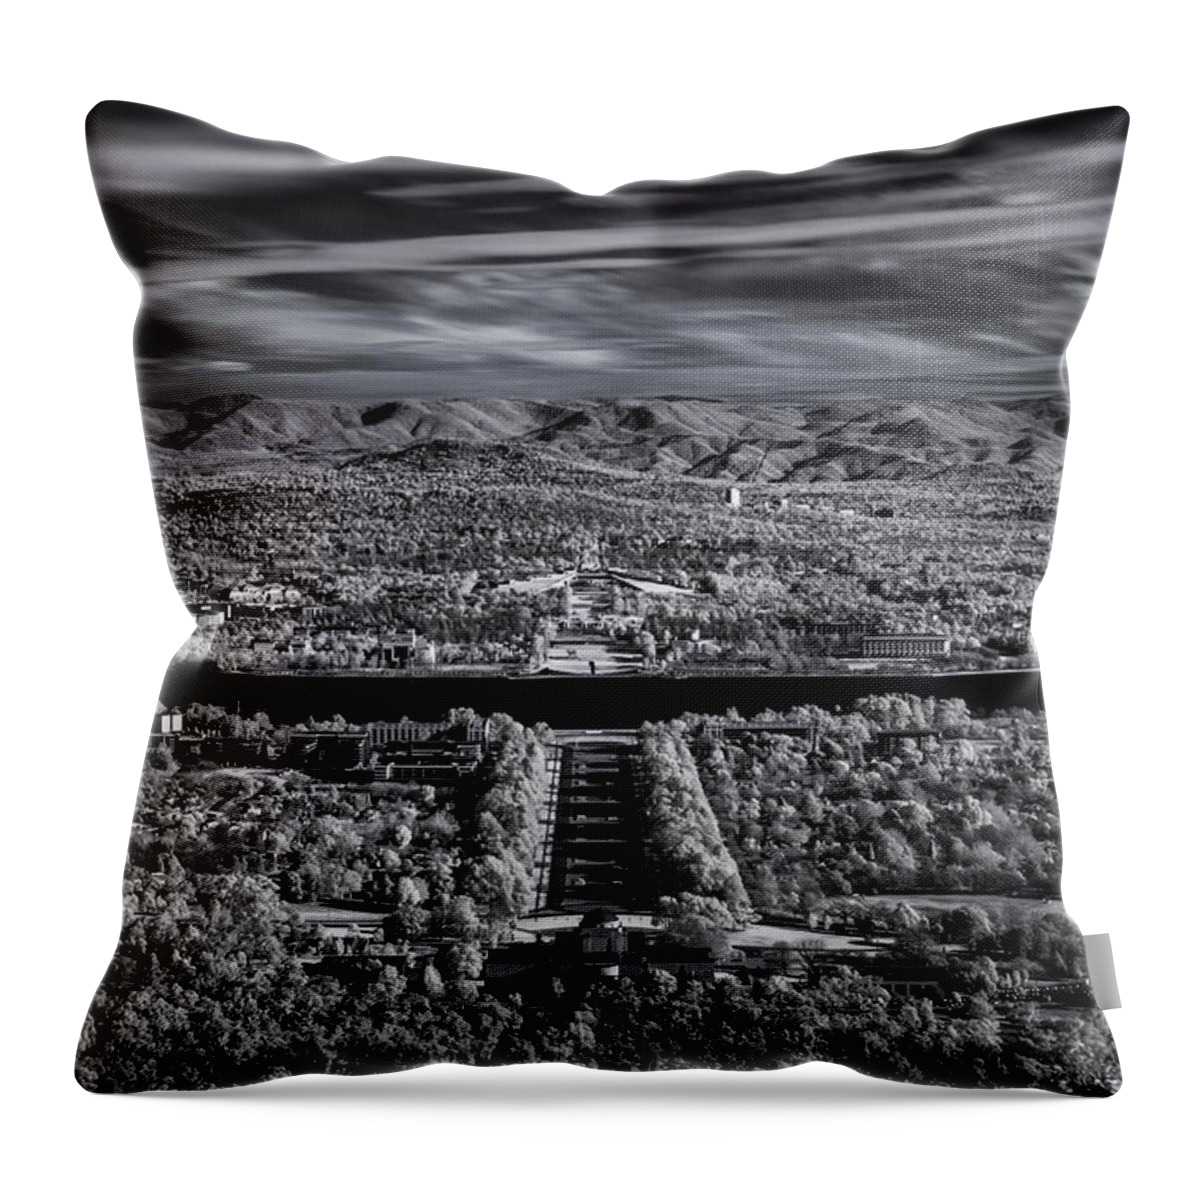 Canberra City Throw Pillow featuring the photograph Another World by Ari Rex